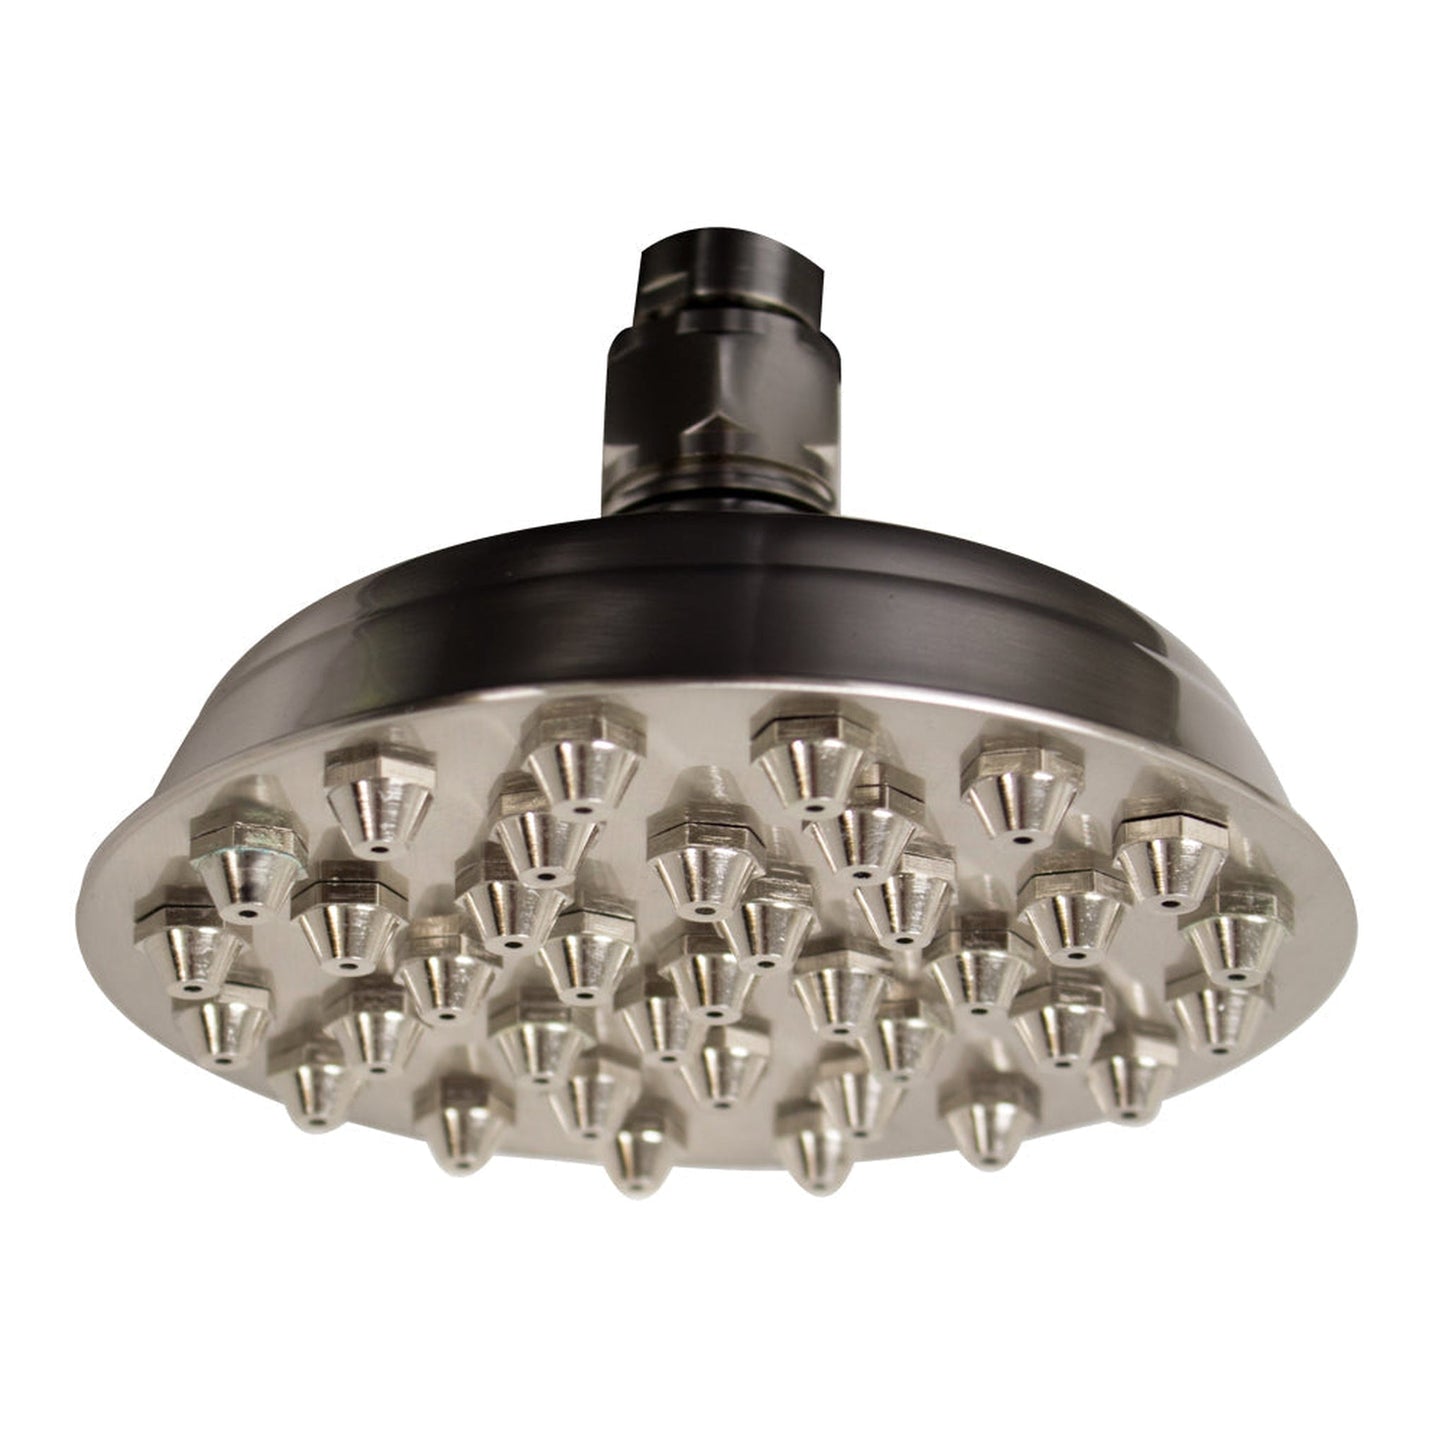 Whitehaus Showerhaus WHSM01-6-BN Brushed Nickel Small Sunflower Rainfall Showerhead With 37 Nozzles - Solid Brass Construction With Adjustable Ball Joint